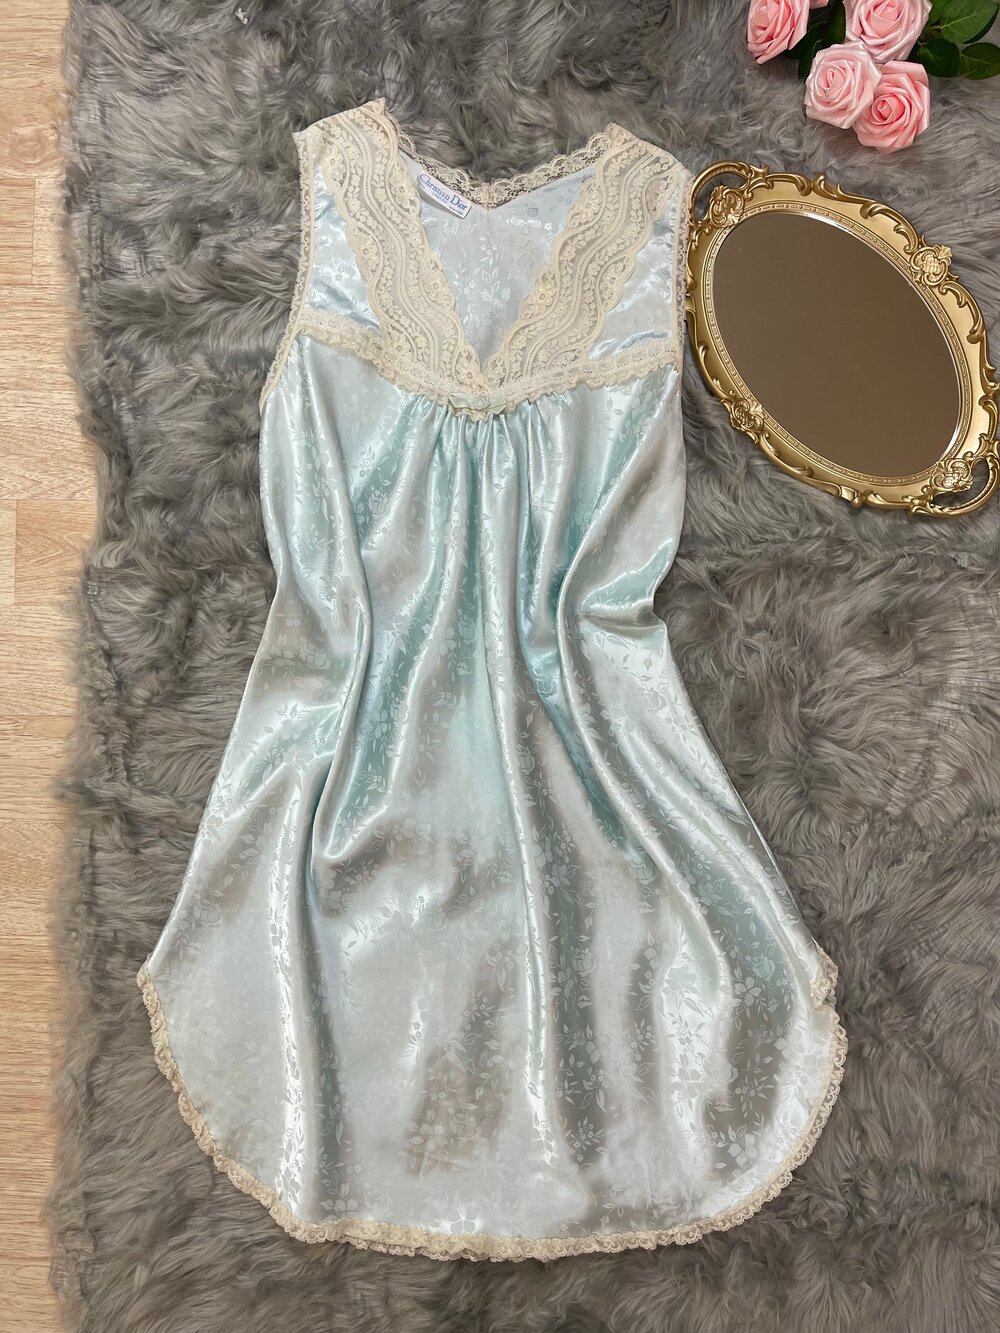 Found this Christian Dior slip dress/ night gown. Can't find any info on it  anywhere. Does anyone know anything about it? TY : r/VintageClothing